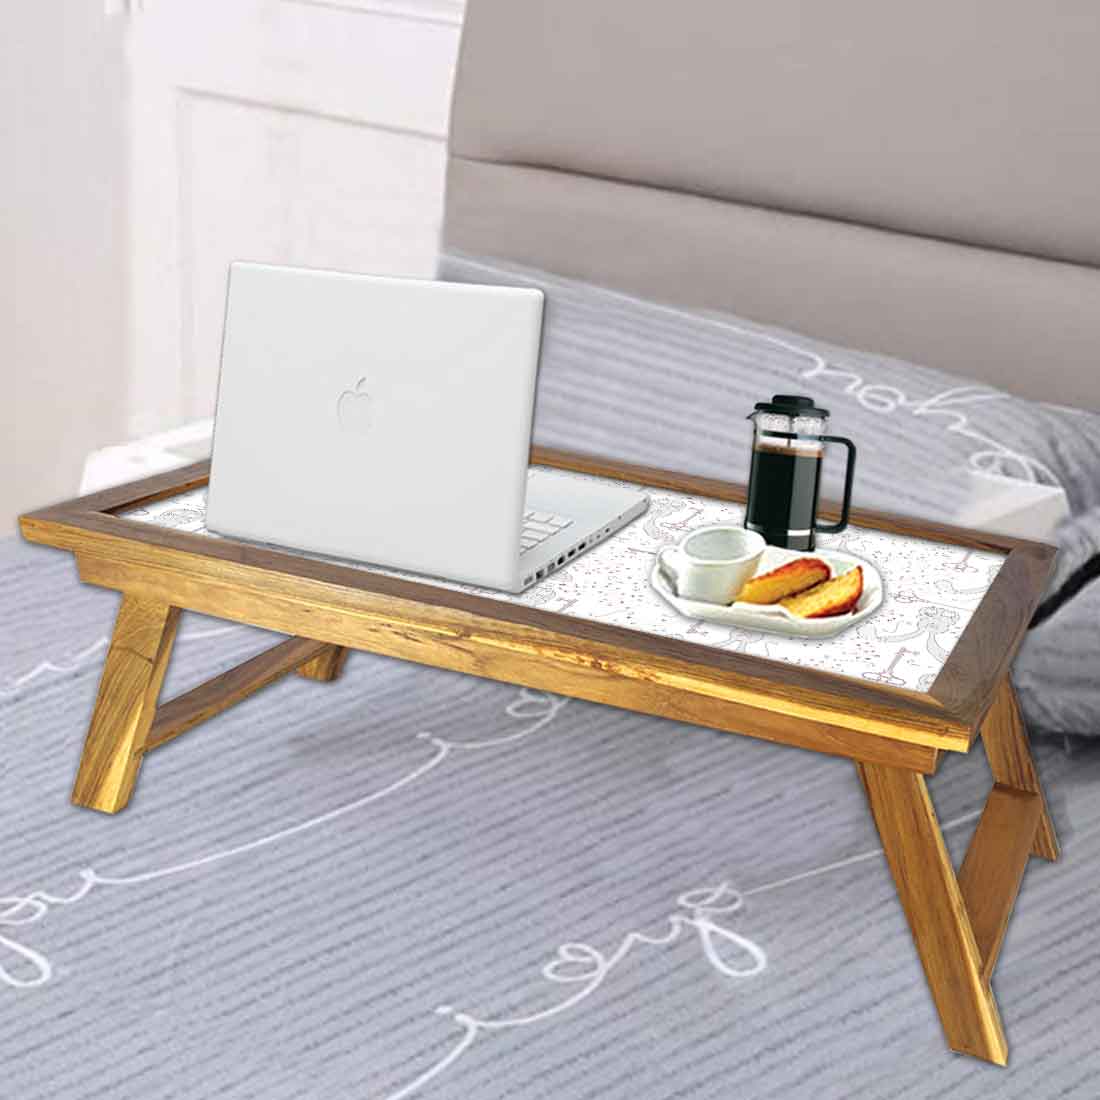 Nutcase Folding Laptop Table For Home Bed Lapdesk Breakfast Table Foldable Teak Wooden Study Desk - Rabbit and Key Nutcase